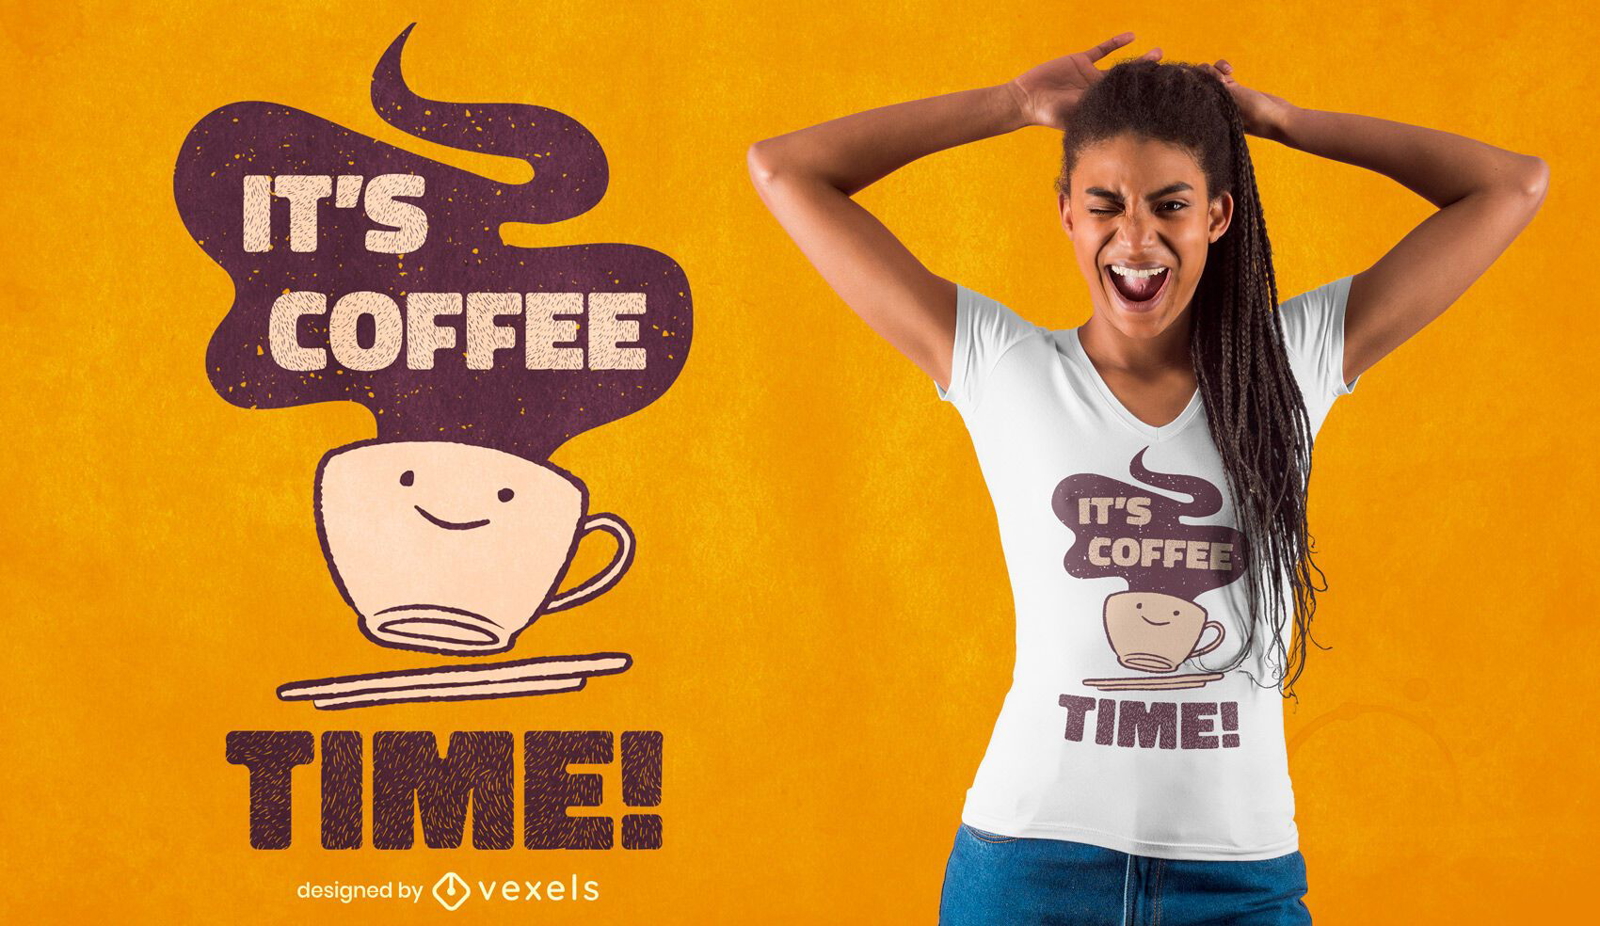 Coffee cup time t-shirt design